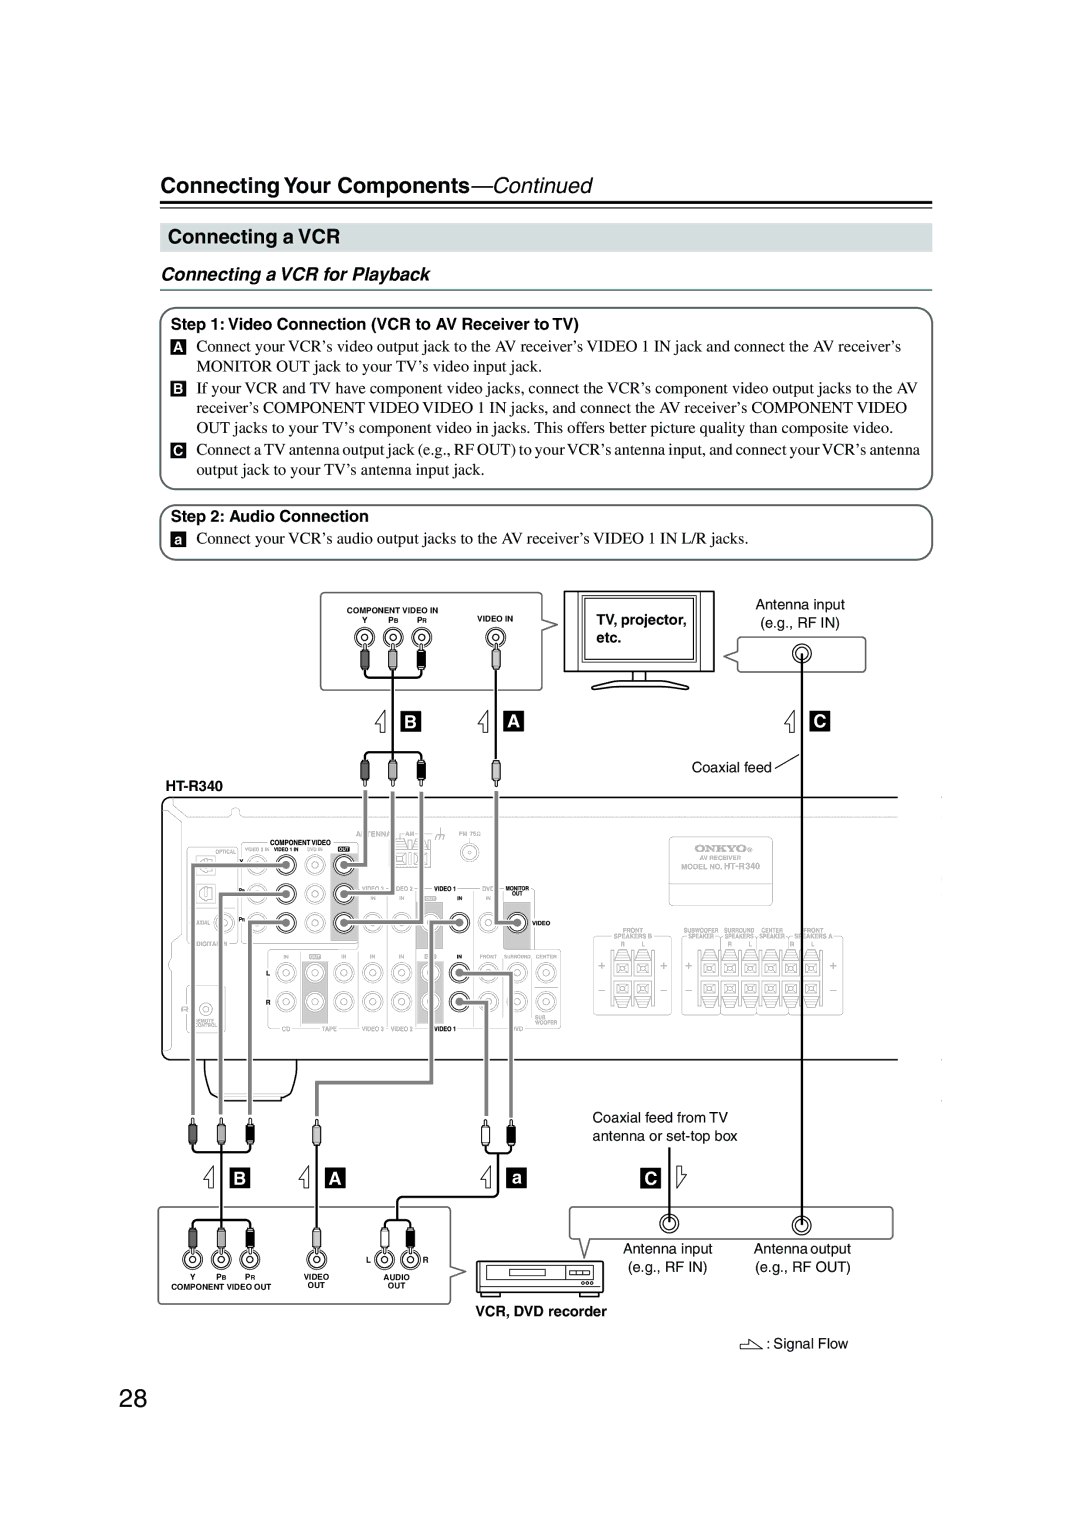 Onkyo HT-S590 instruction manual Connecting a VCR for Playback, Video Connection VCR to AV Receiver to TV 